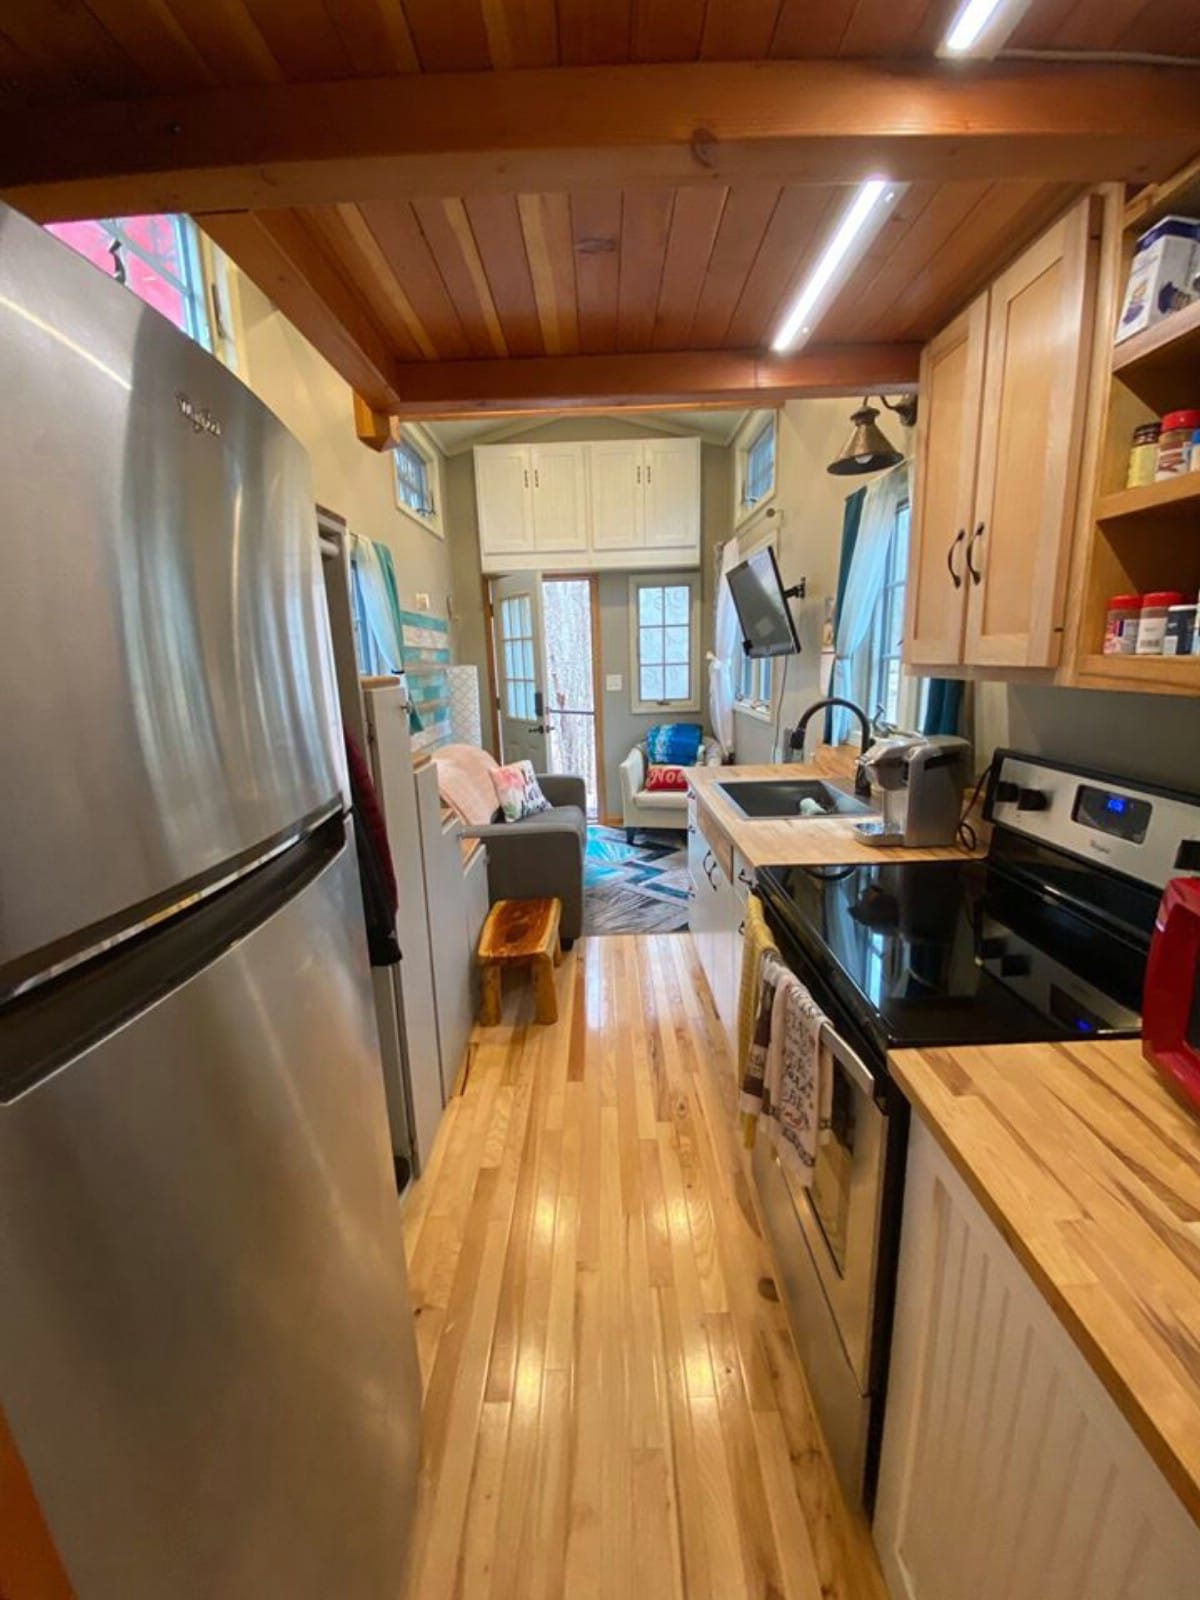 View of kitchen in tiny home